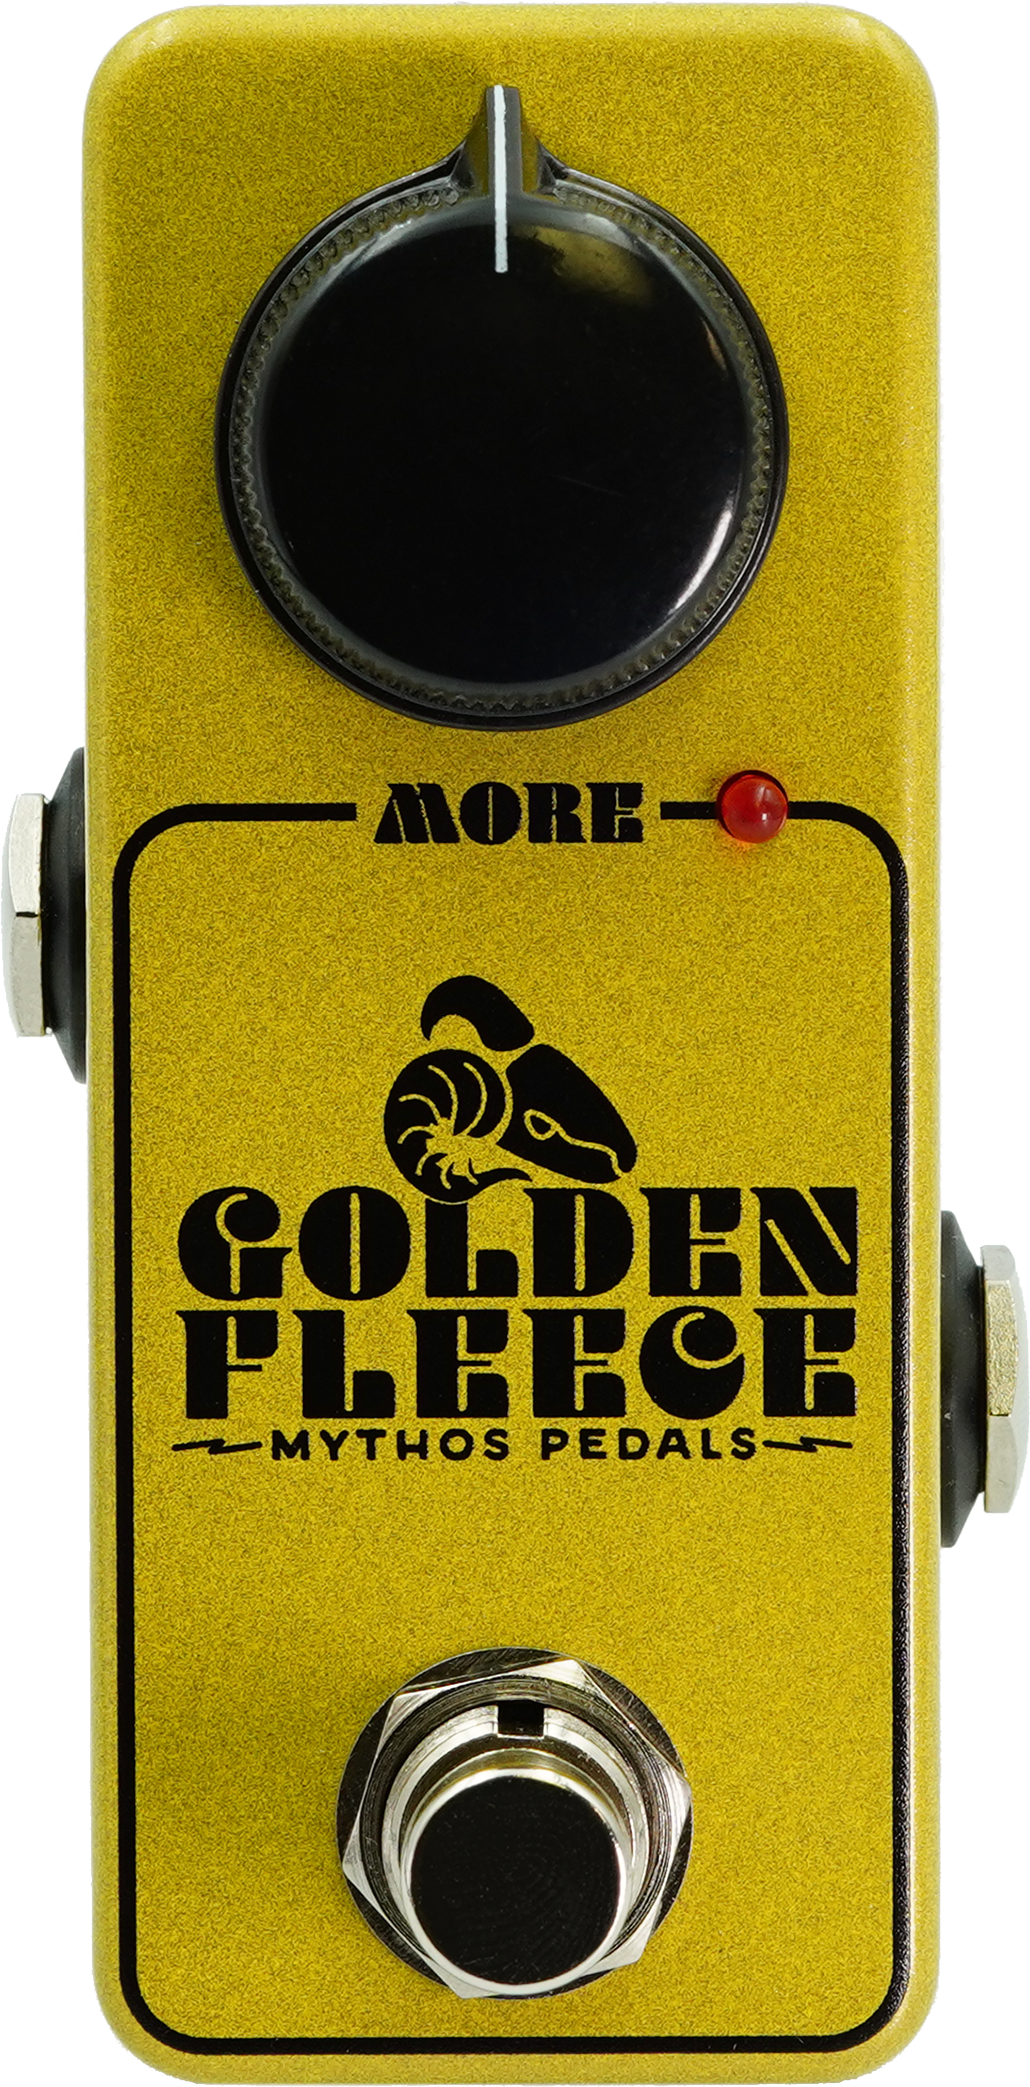 Mythos Pedals Golden Fleece - Overdrive, distortion & fuzz effect pedal - Main picture